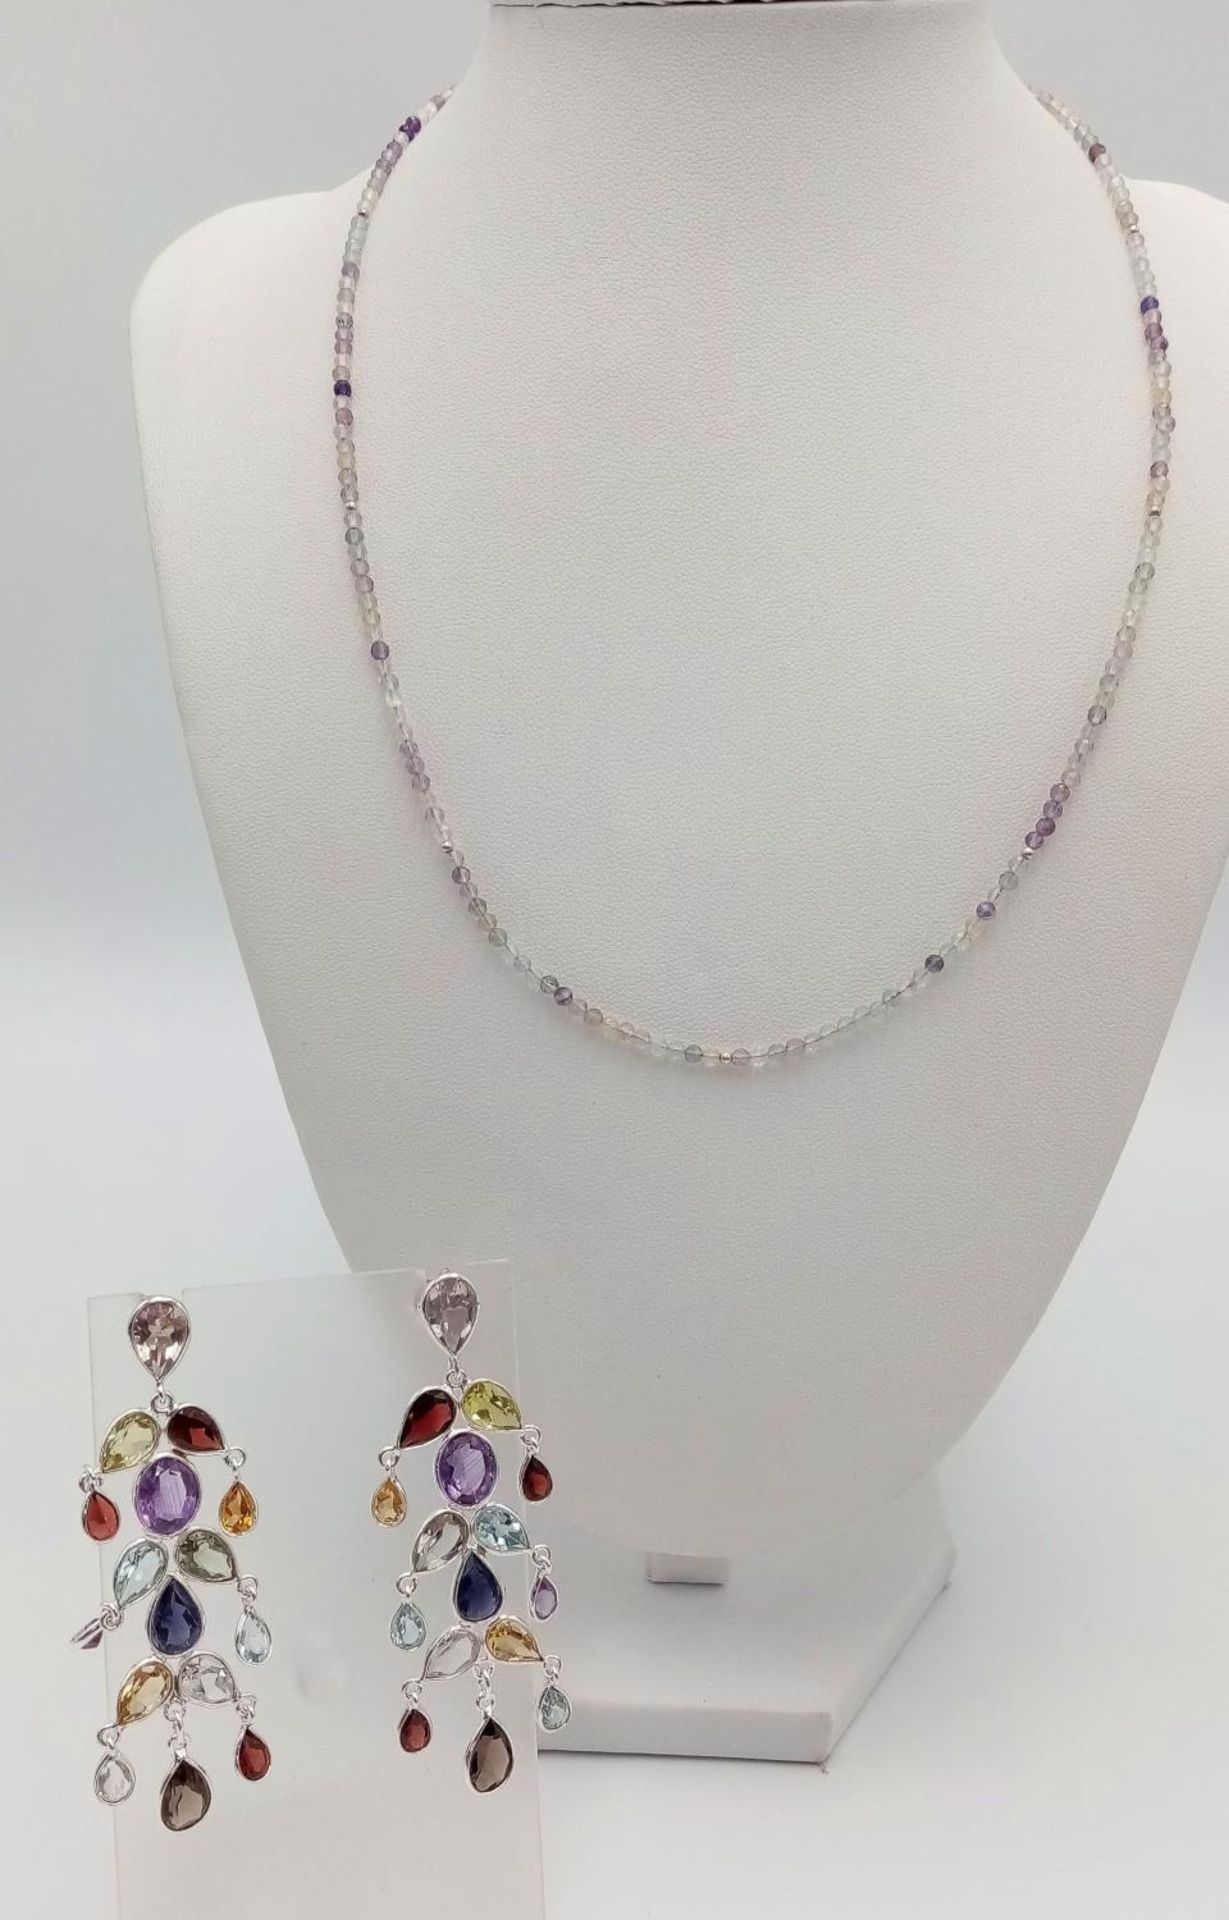 A Pair of Amethyst, Garnet, Citrine and Blue Topaz Drop Earrings -with a Delicate Fluorite Strand